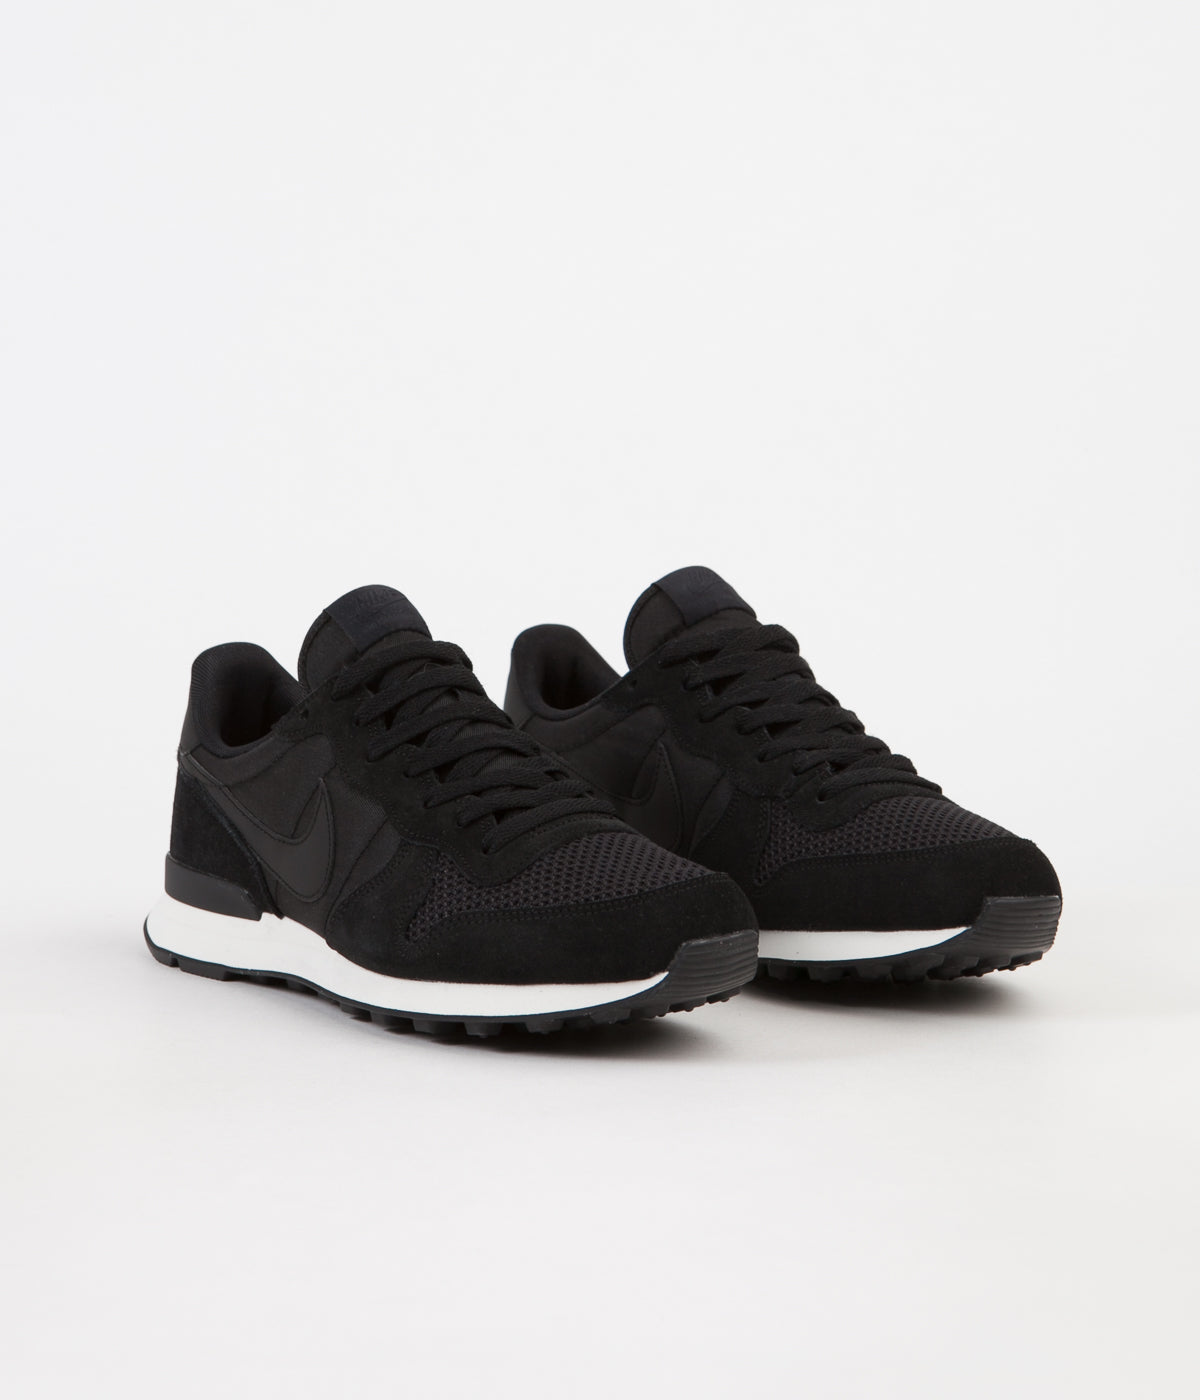 Nike Internationalist Special Edition Shoes - / Black - Sail | Always in Colour